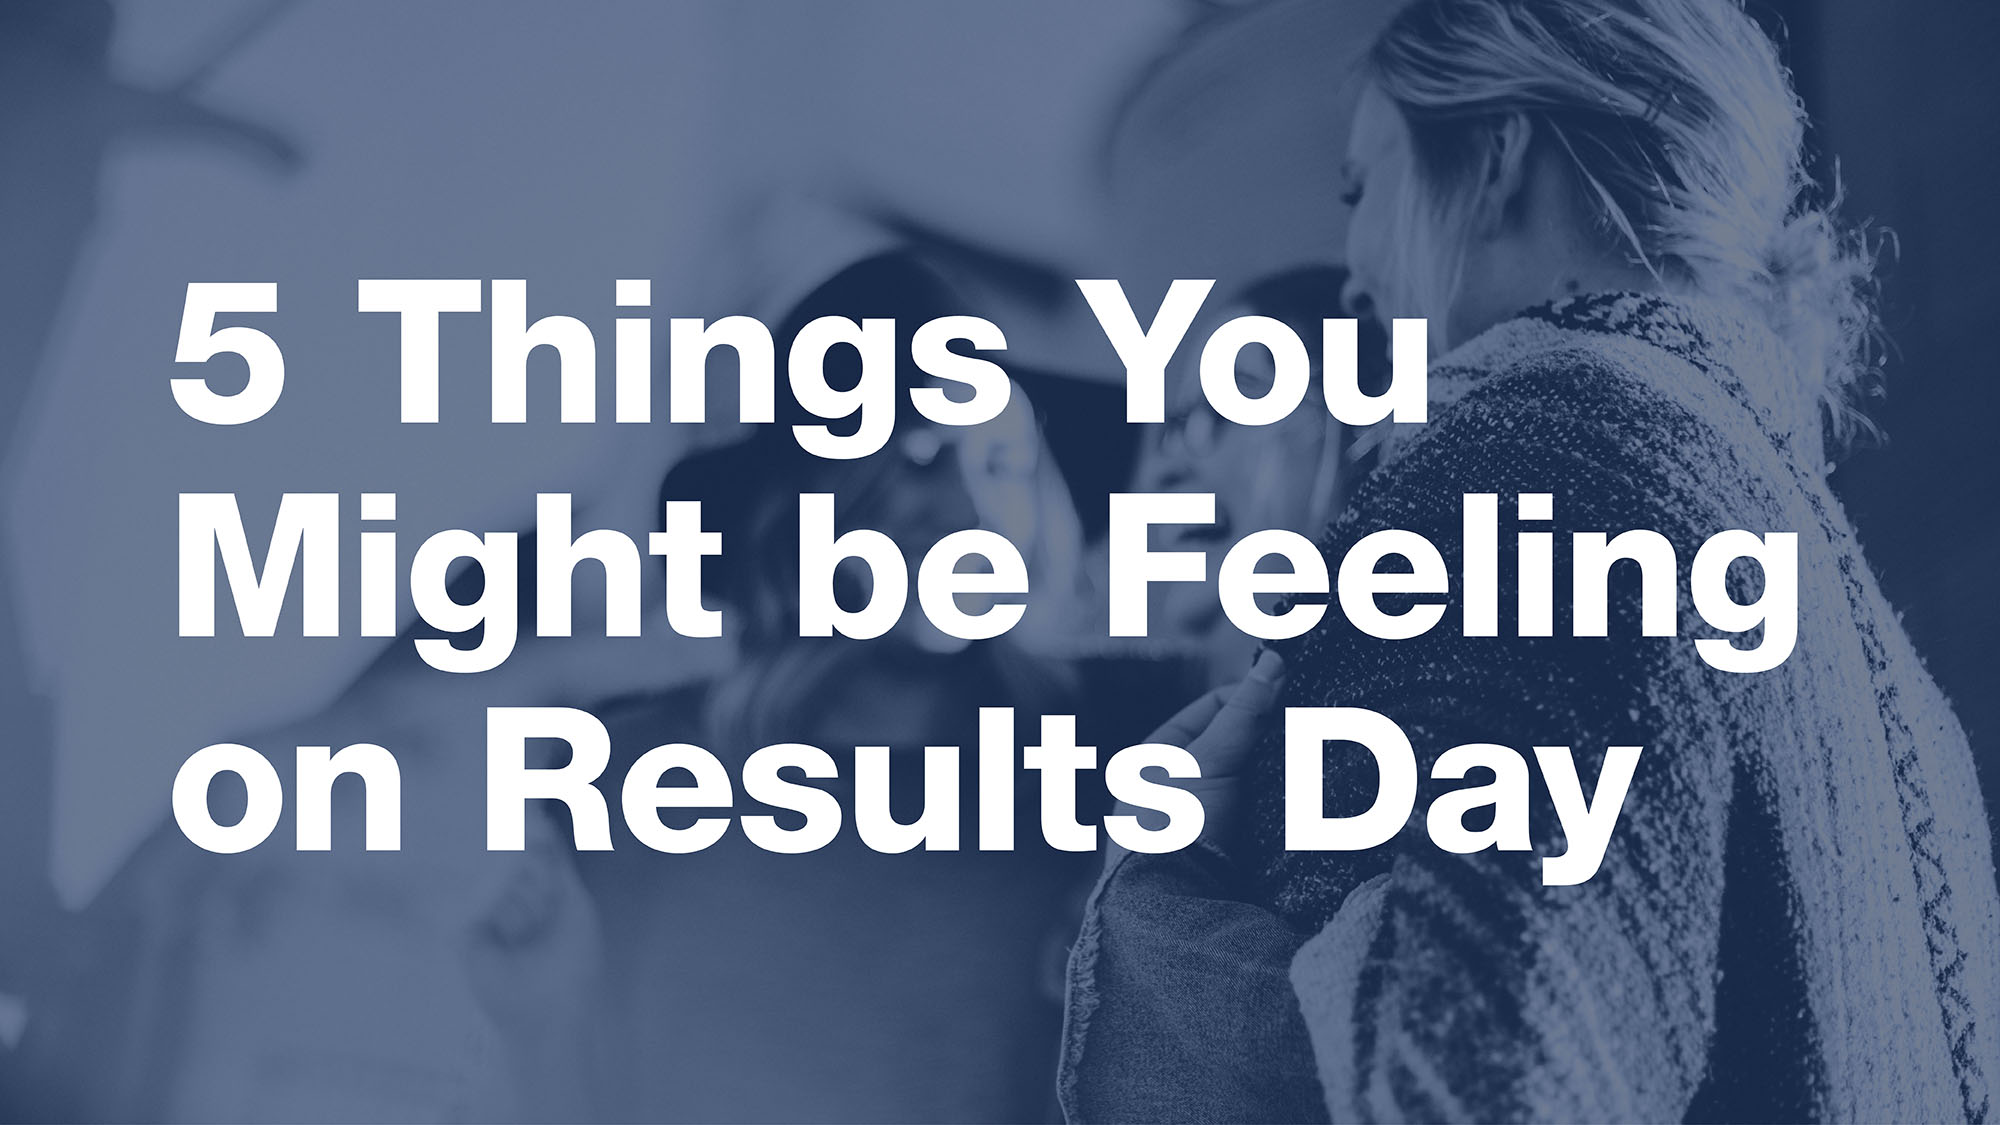 Five things you might be feeling on results day